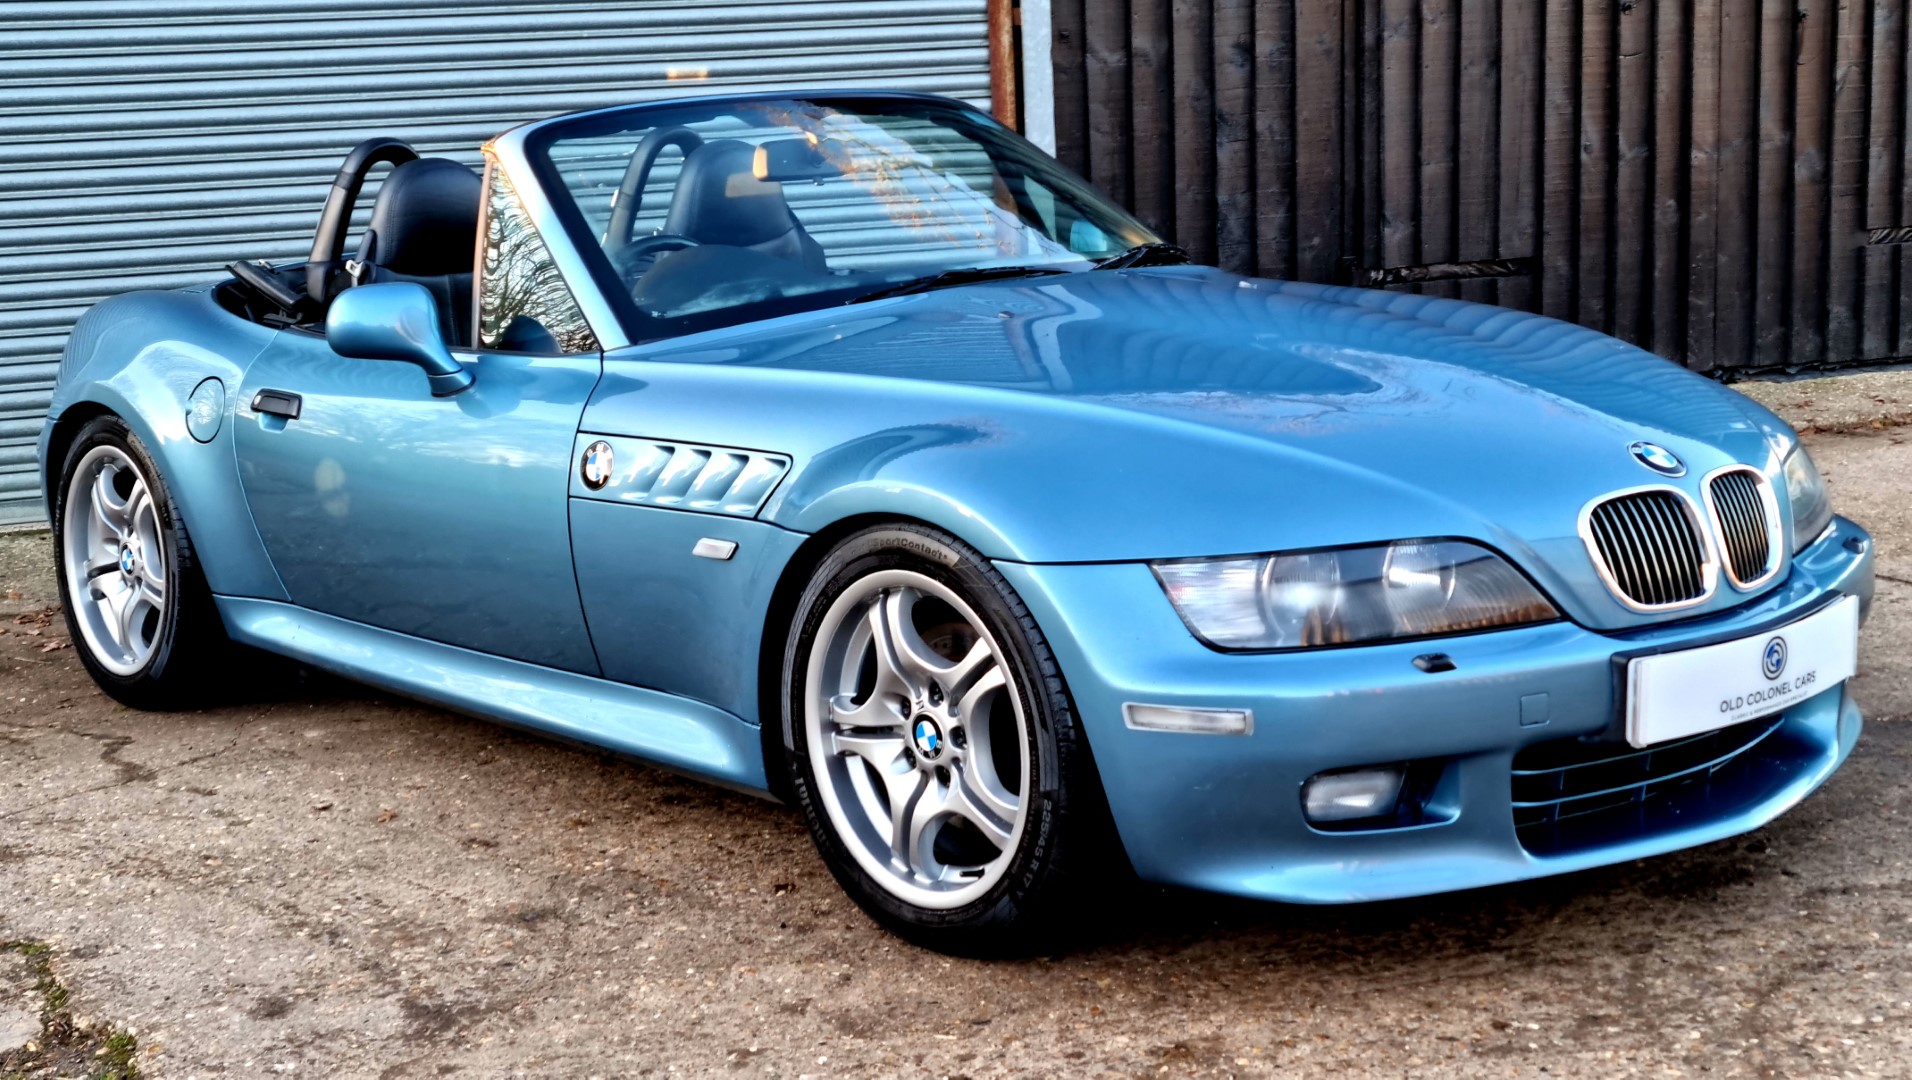 BMW Z3 3.0 MANUAL ROADSTER - Old Colonel Cars - Old Colonel Cars